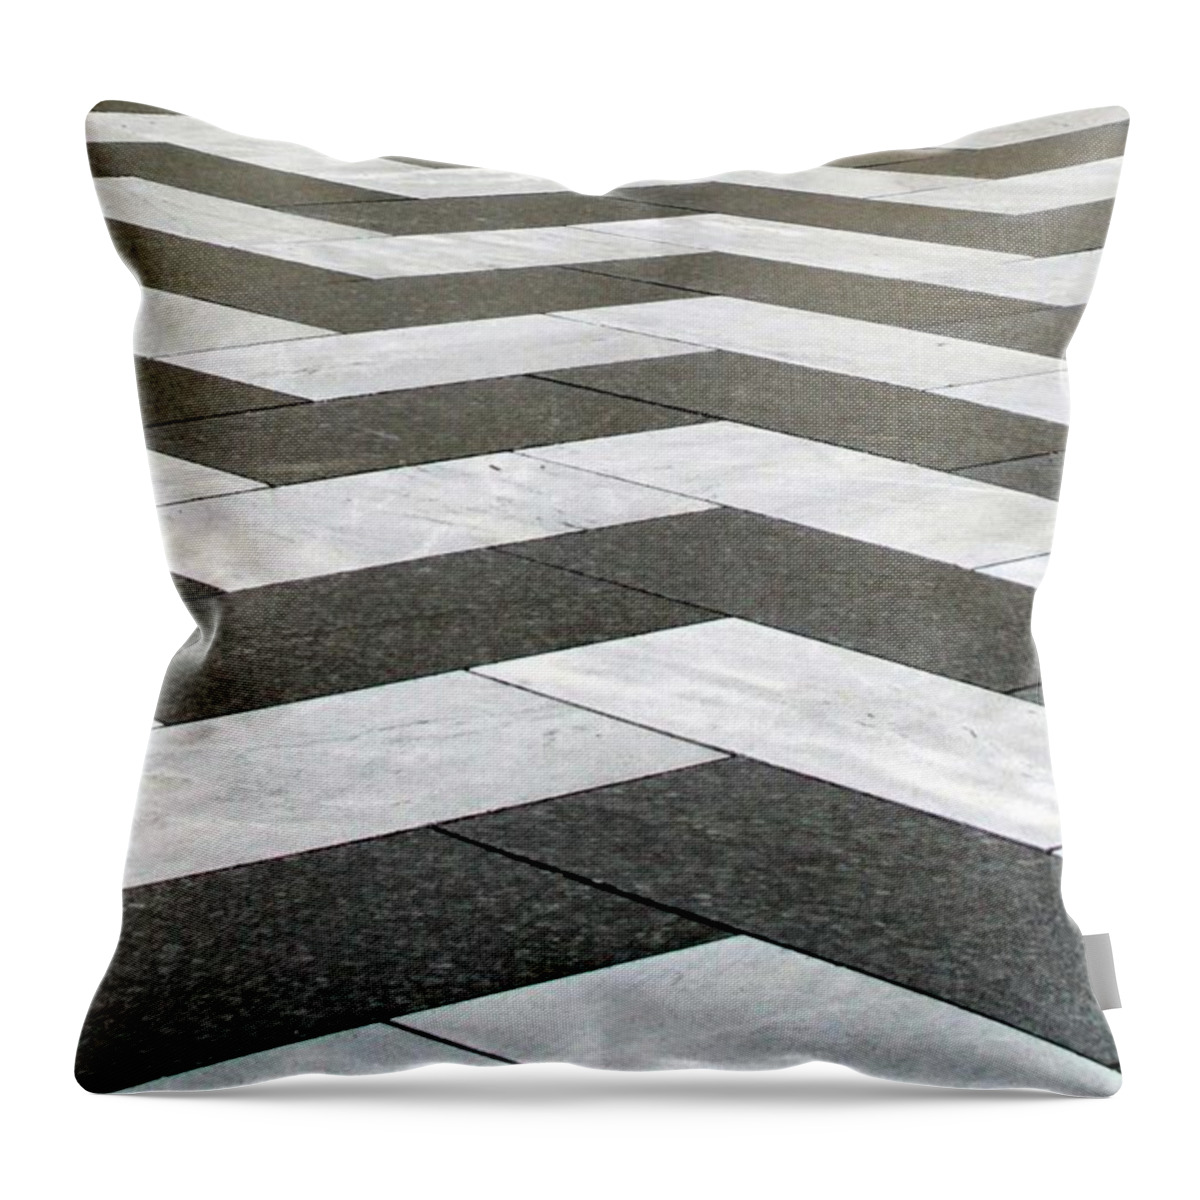 Chevron Stripes Tile Pattern Abstract black And White Square Rectangle Floor Wall Grid Throw Pillow featuring the mixed media Chevron by Linda Woods